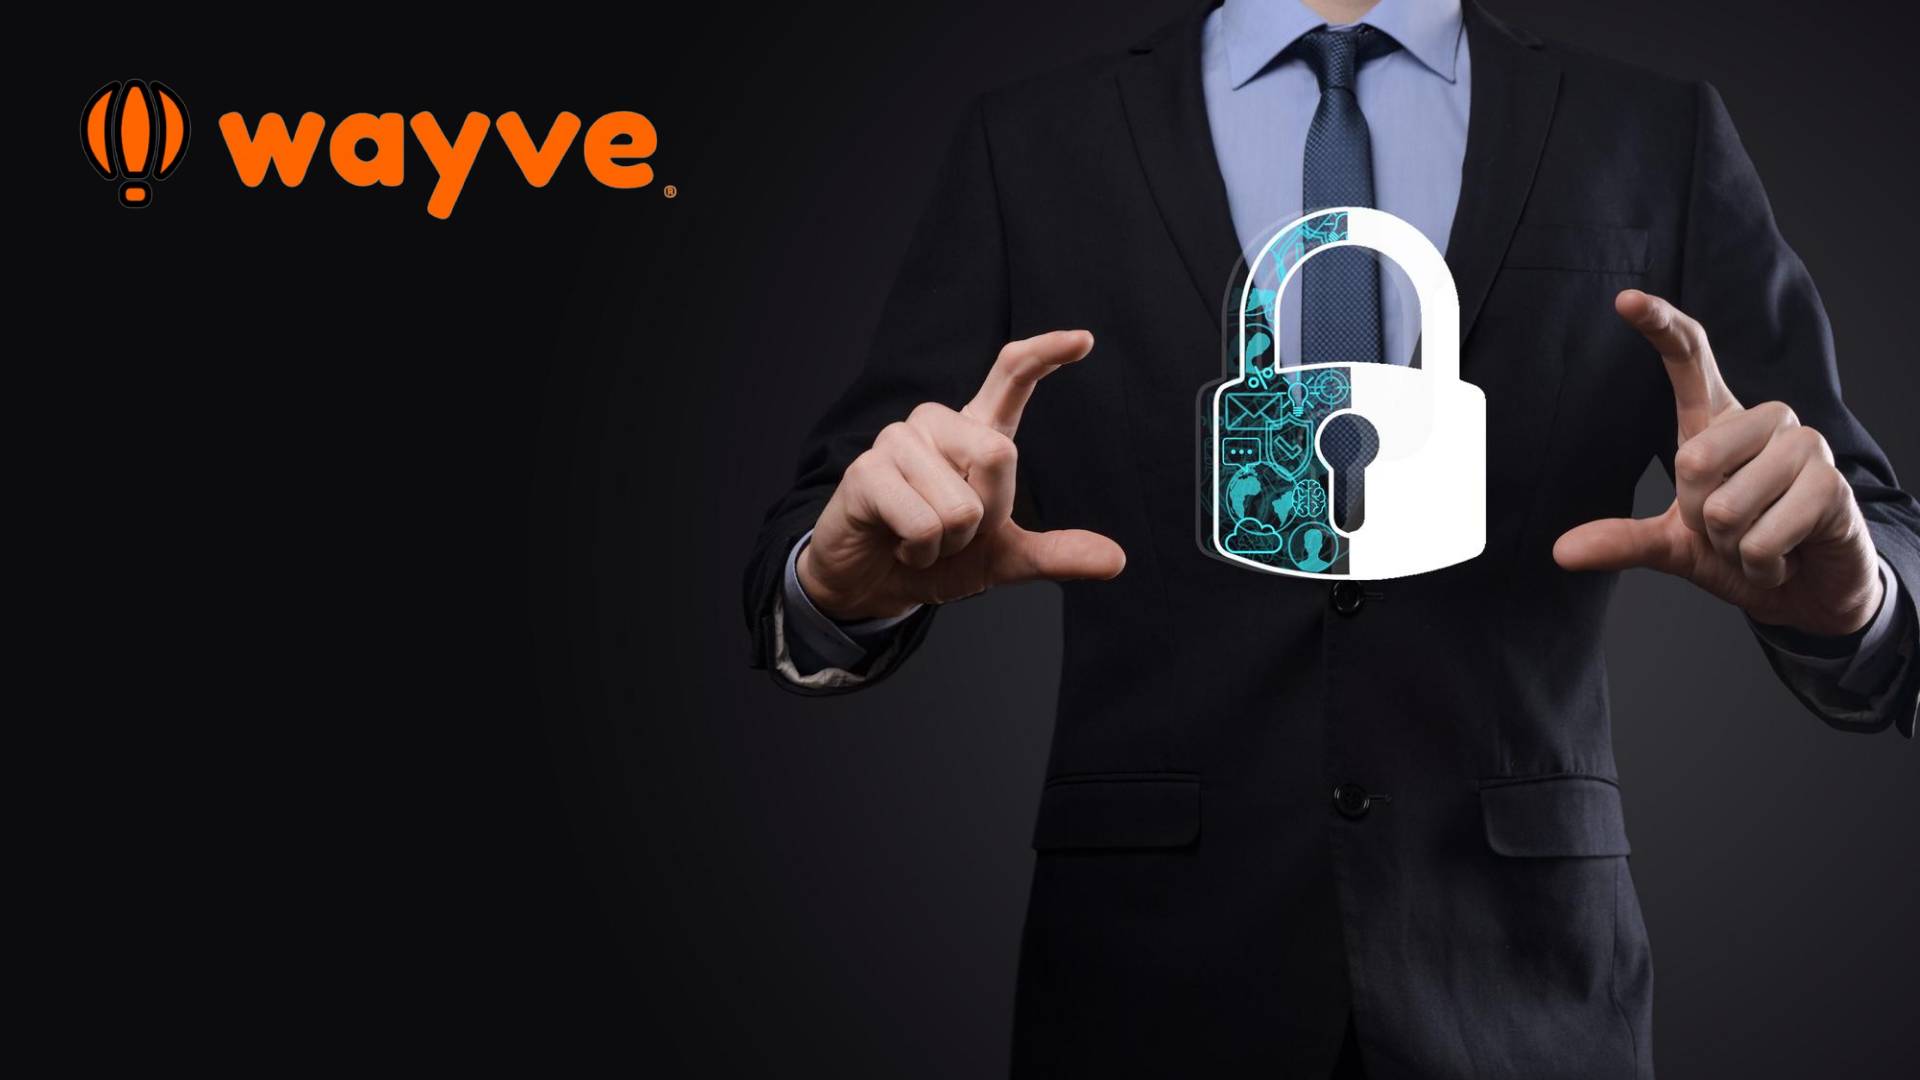 Wayve: Redefining Social Media with Privacy and Security at Its Core